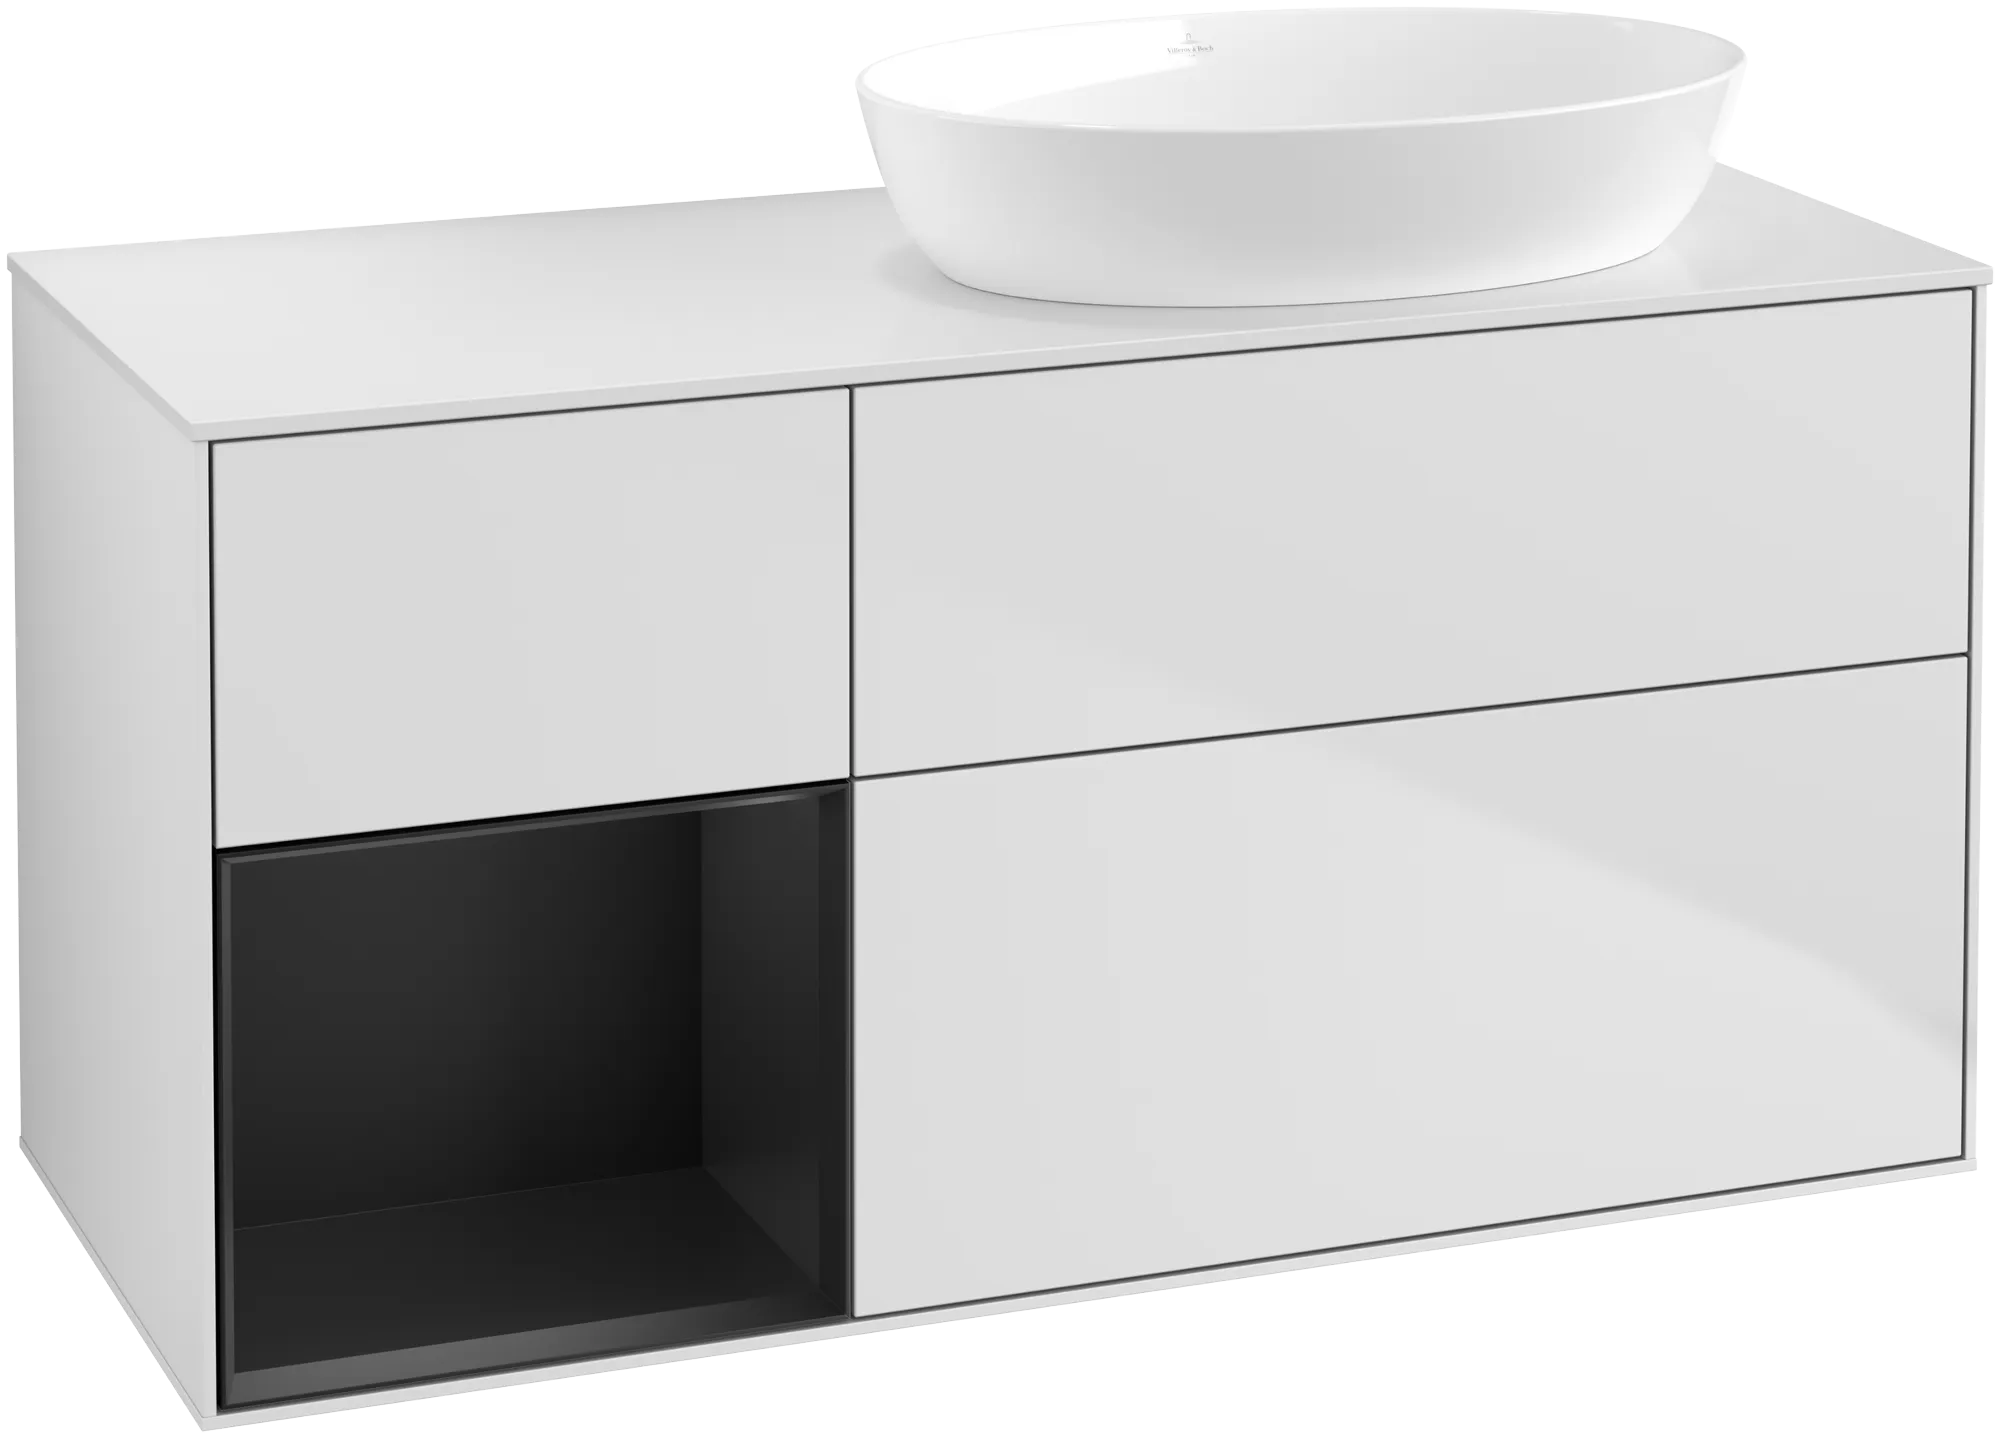 Picture of VILLEROY BOCH Finion Vanity unit, with lighting, 3 pull-out compartments, 1200 x 603 x 501 mm, White Matt Lacquer / Black Matt Lacquer / Glass White Matt #GA41PDMT